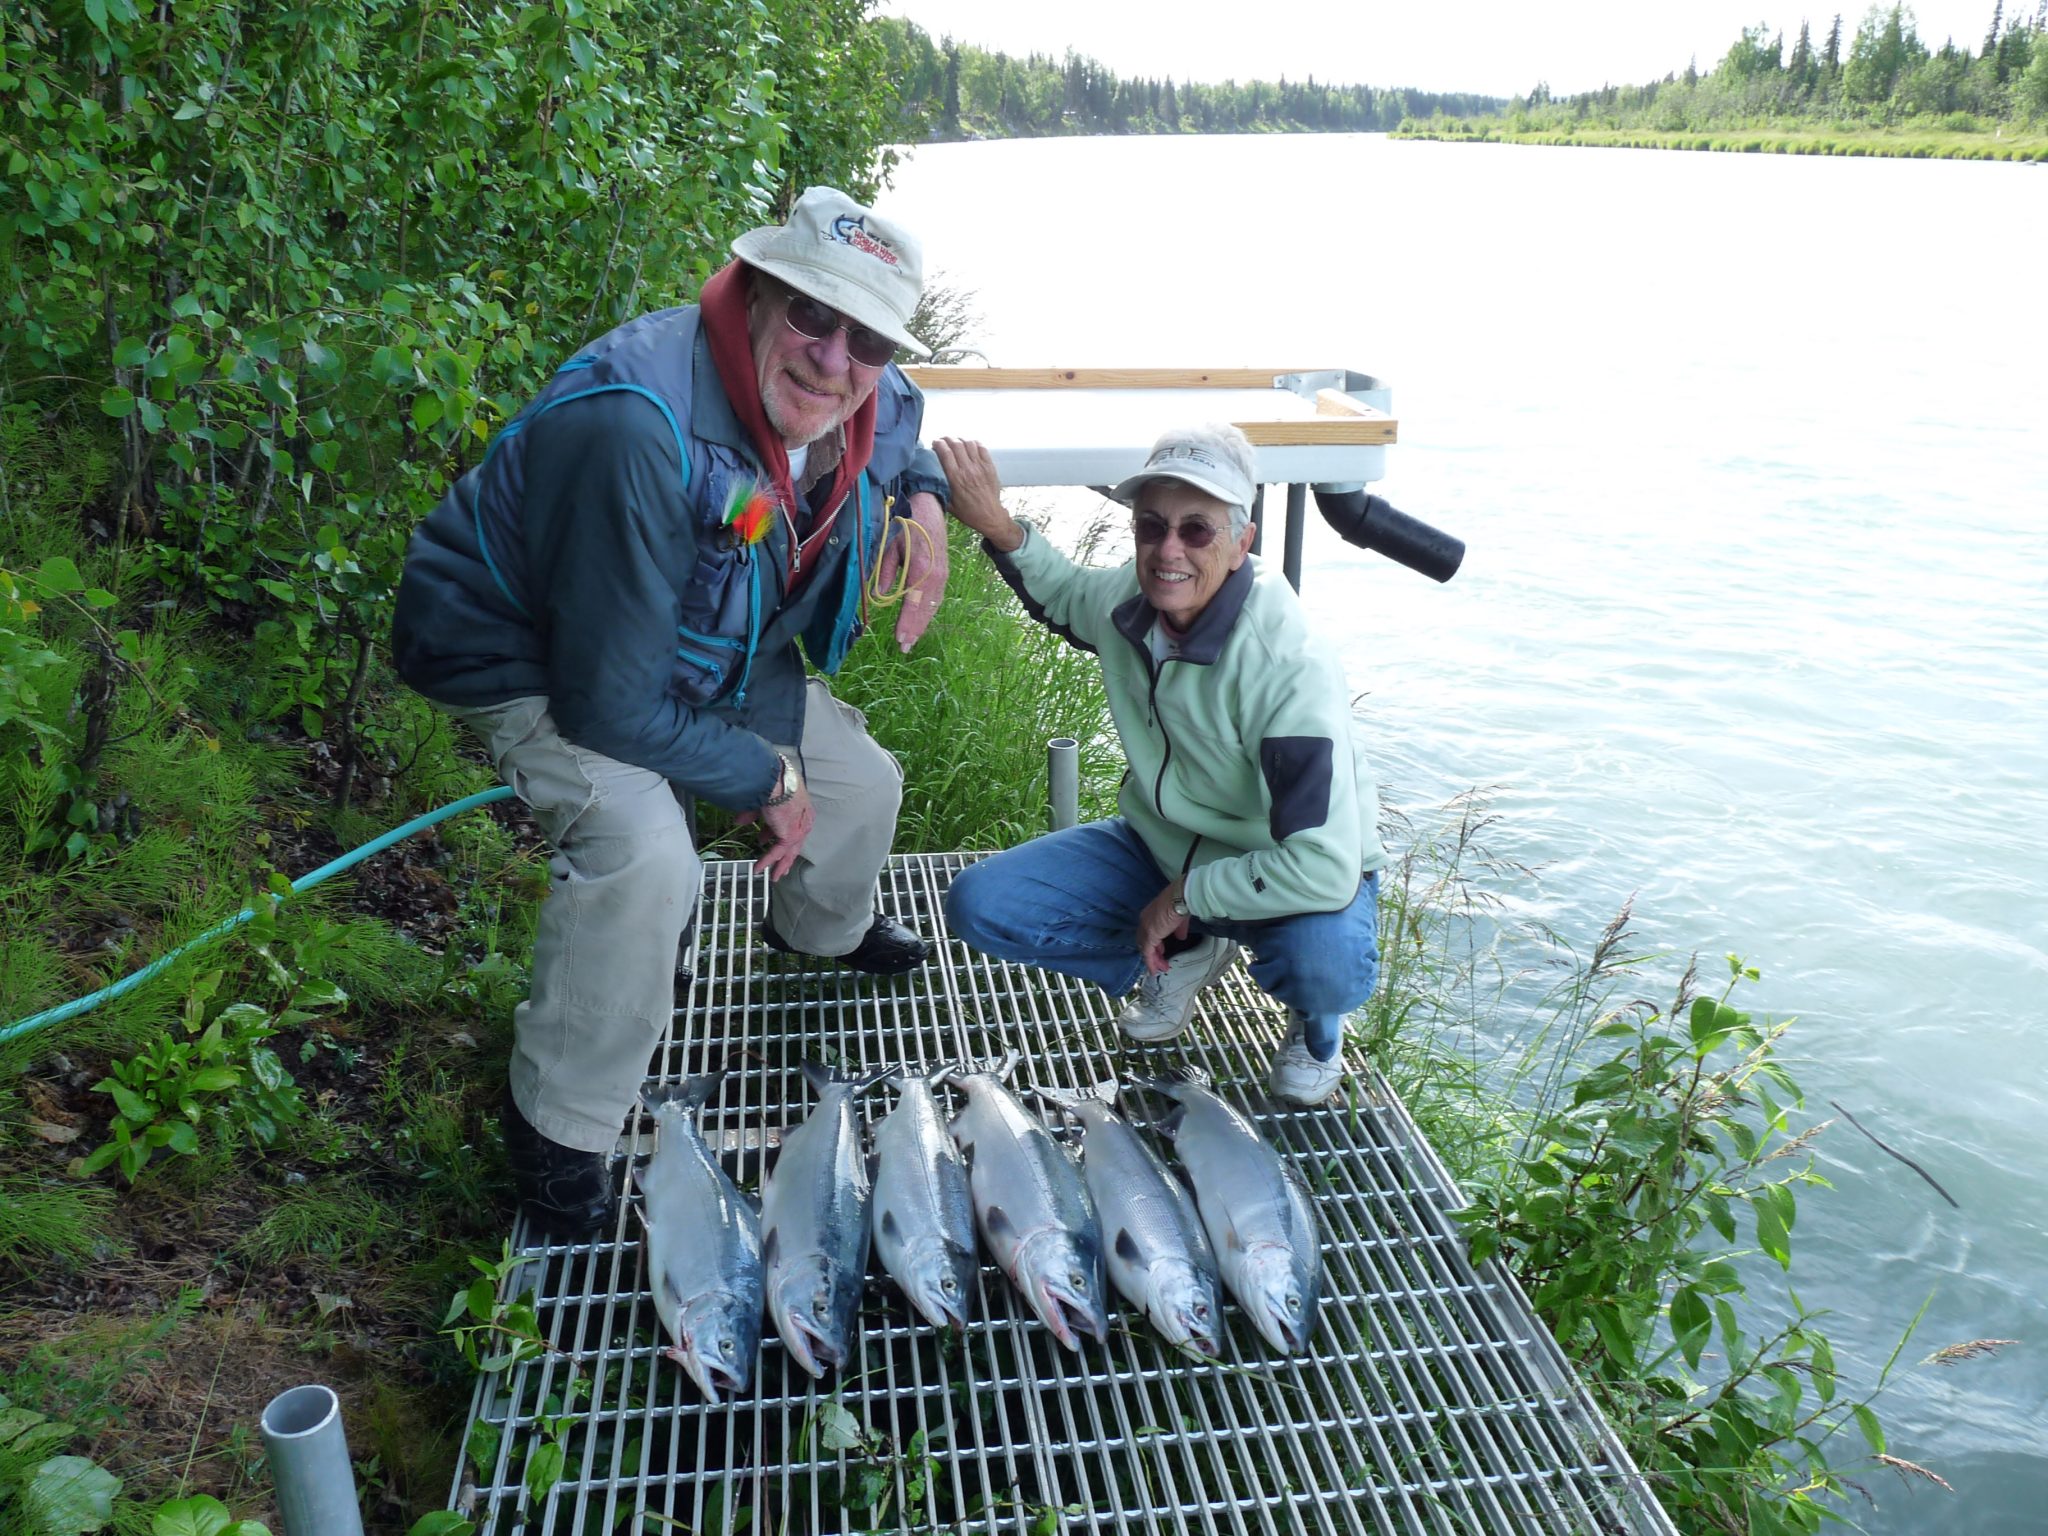 Dad,  You will be with us forever.  Every time I cast a line off the Alaska river walkways, I will think of you.